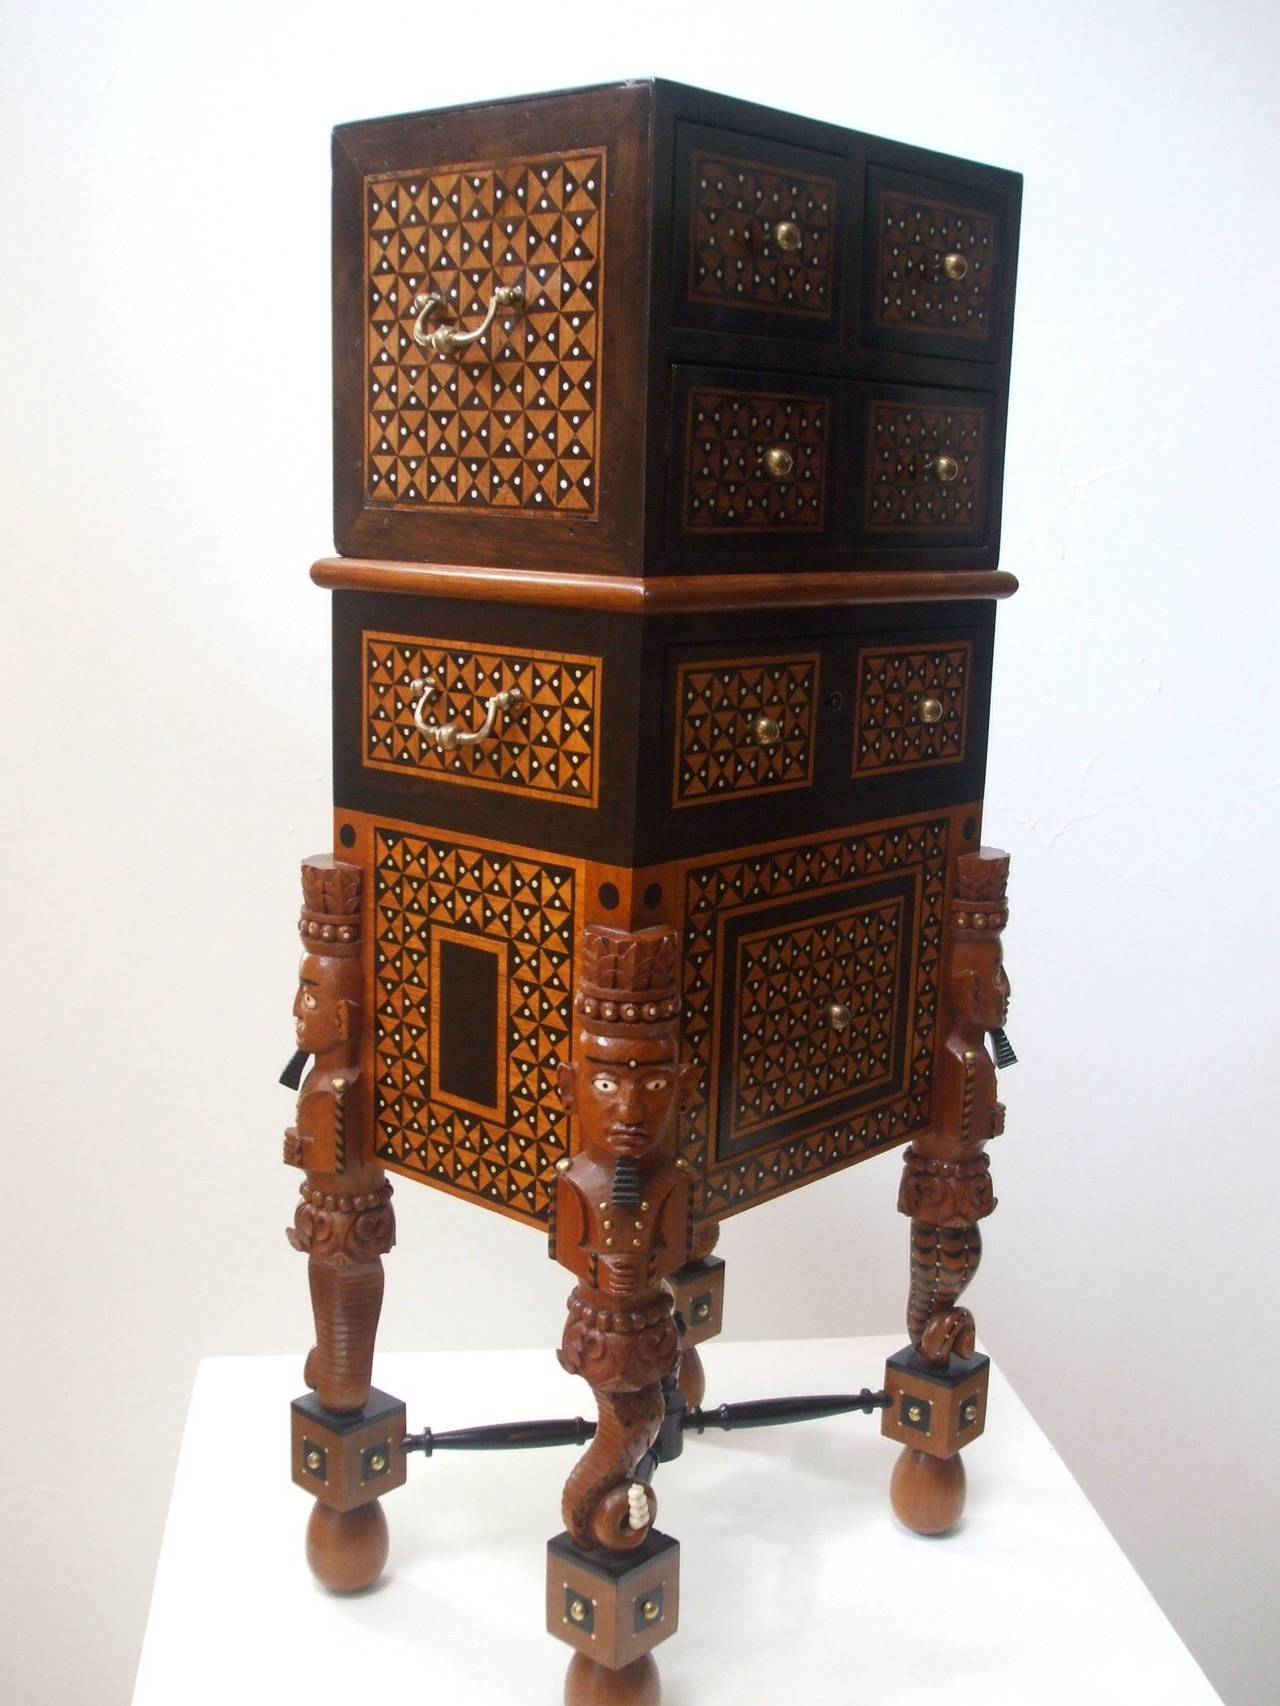 An amazing work of art inspired by and utilizing a late 17th, early 18th century Indo-Portuguese small three drawer table chest now on a carved and inlaid two drawer stand of teak, ebony and faux-ivory with custom bronze mounts by San Francisco